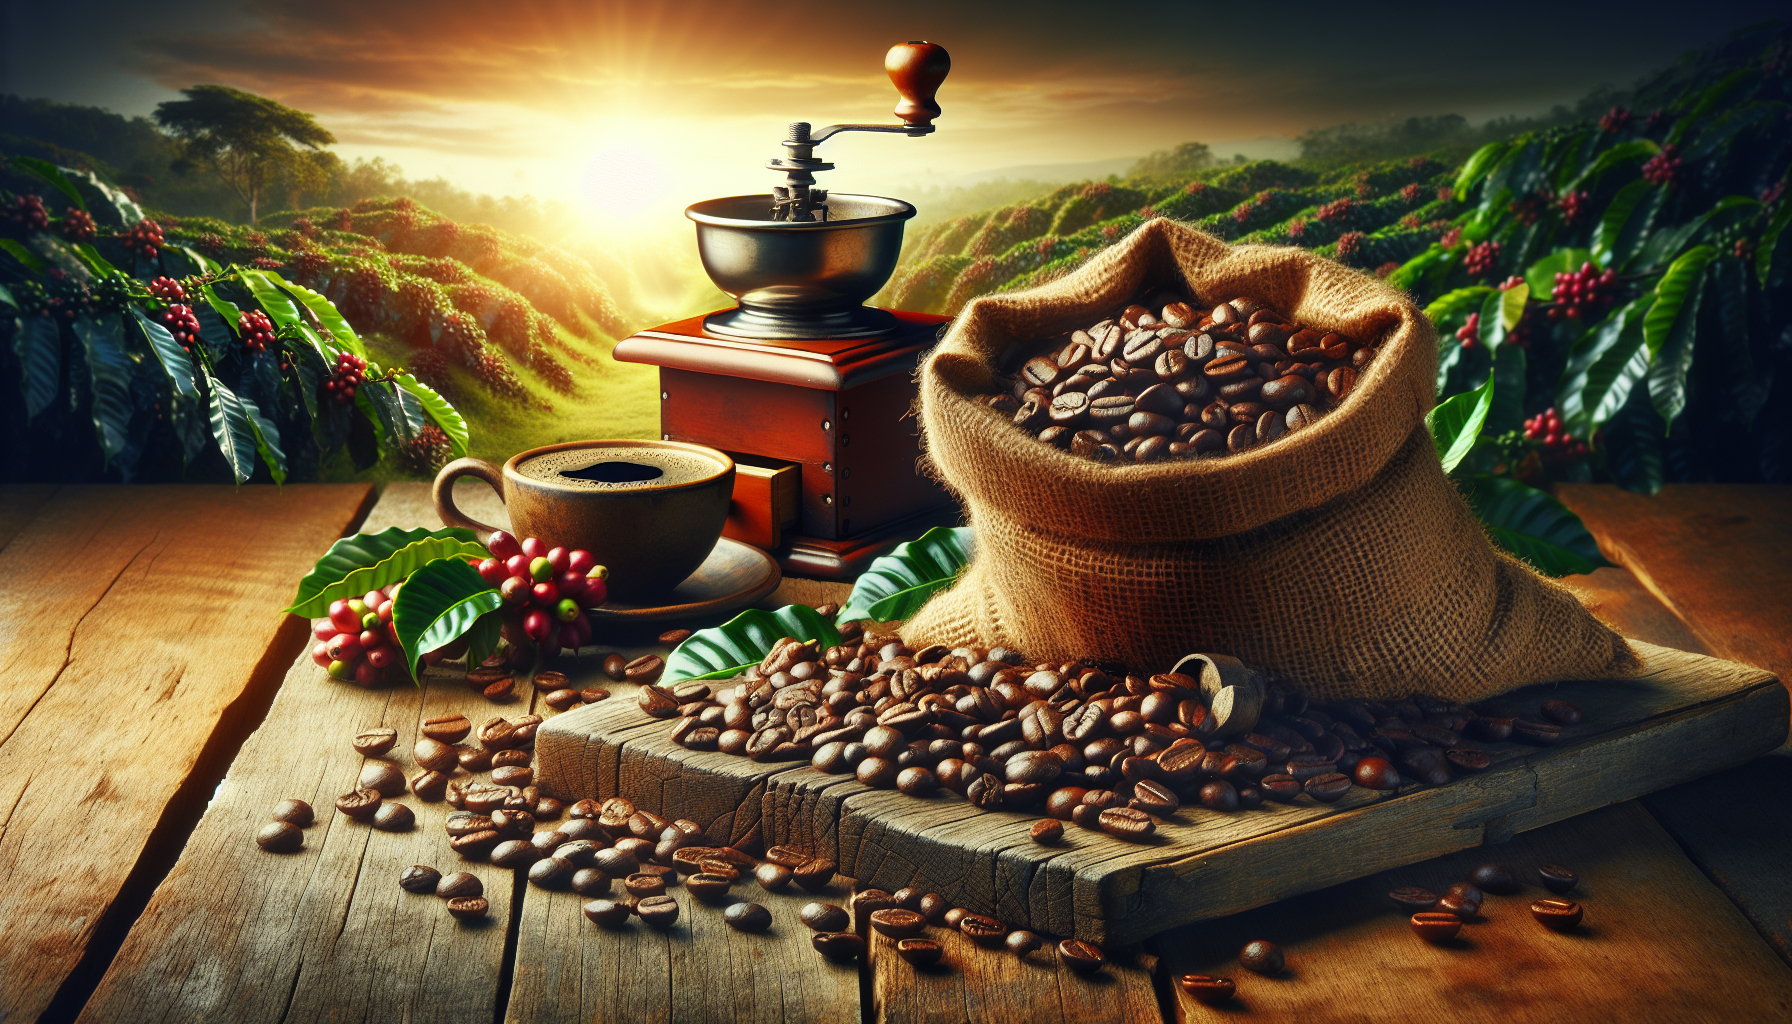 An image showcasing the richness of organic whole bean coffee. Picture an abundance of fresh coffee beans, glistening with oils. The beans are of a variety of depths of brown, indicating a range of ro